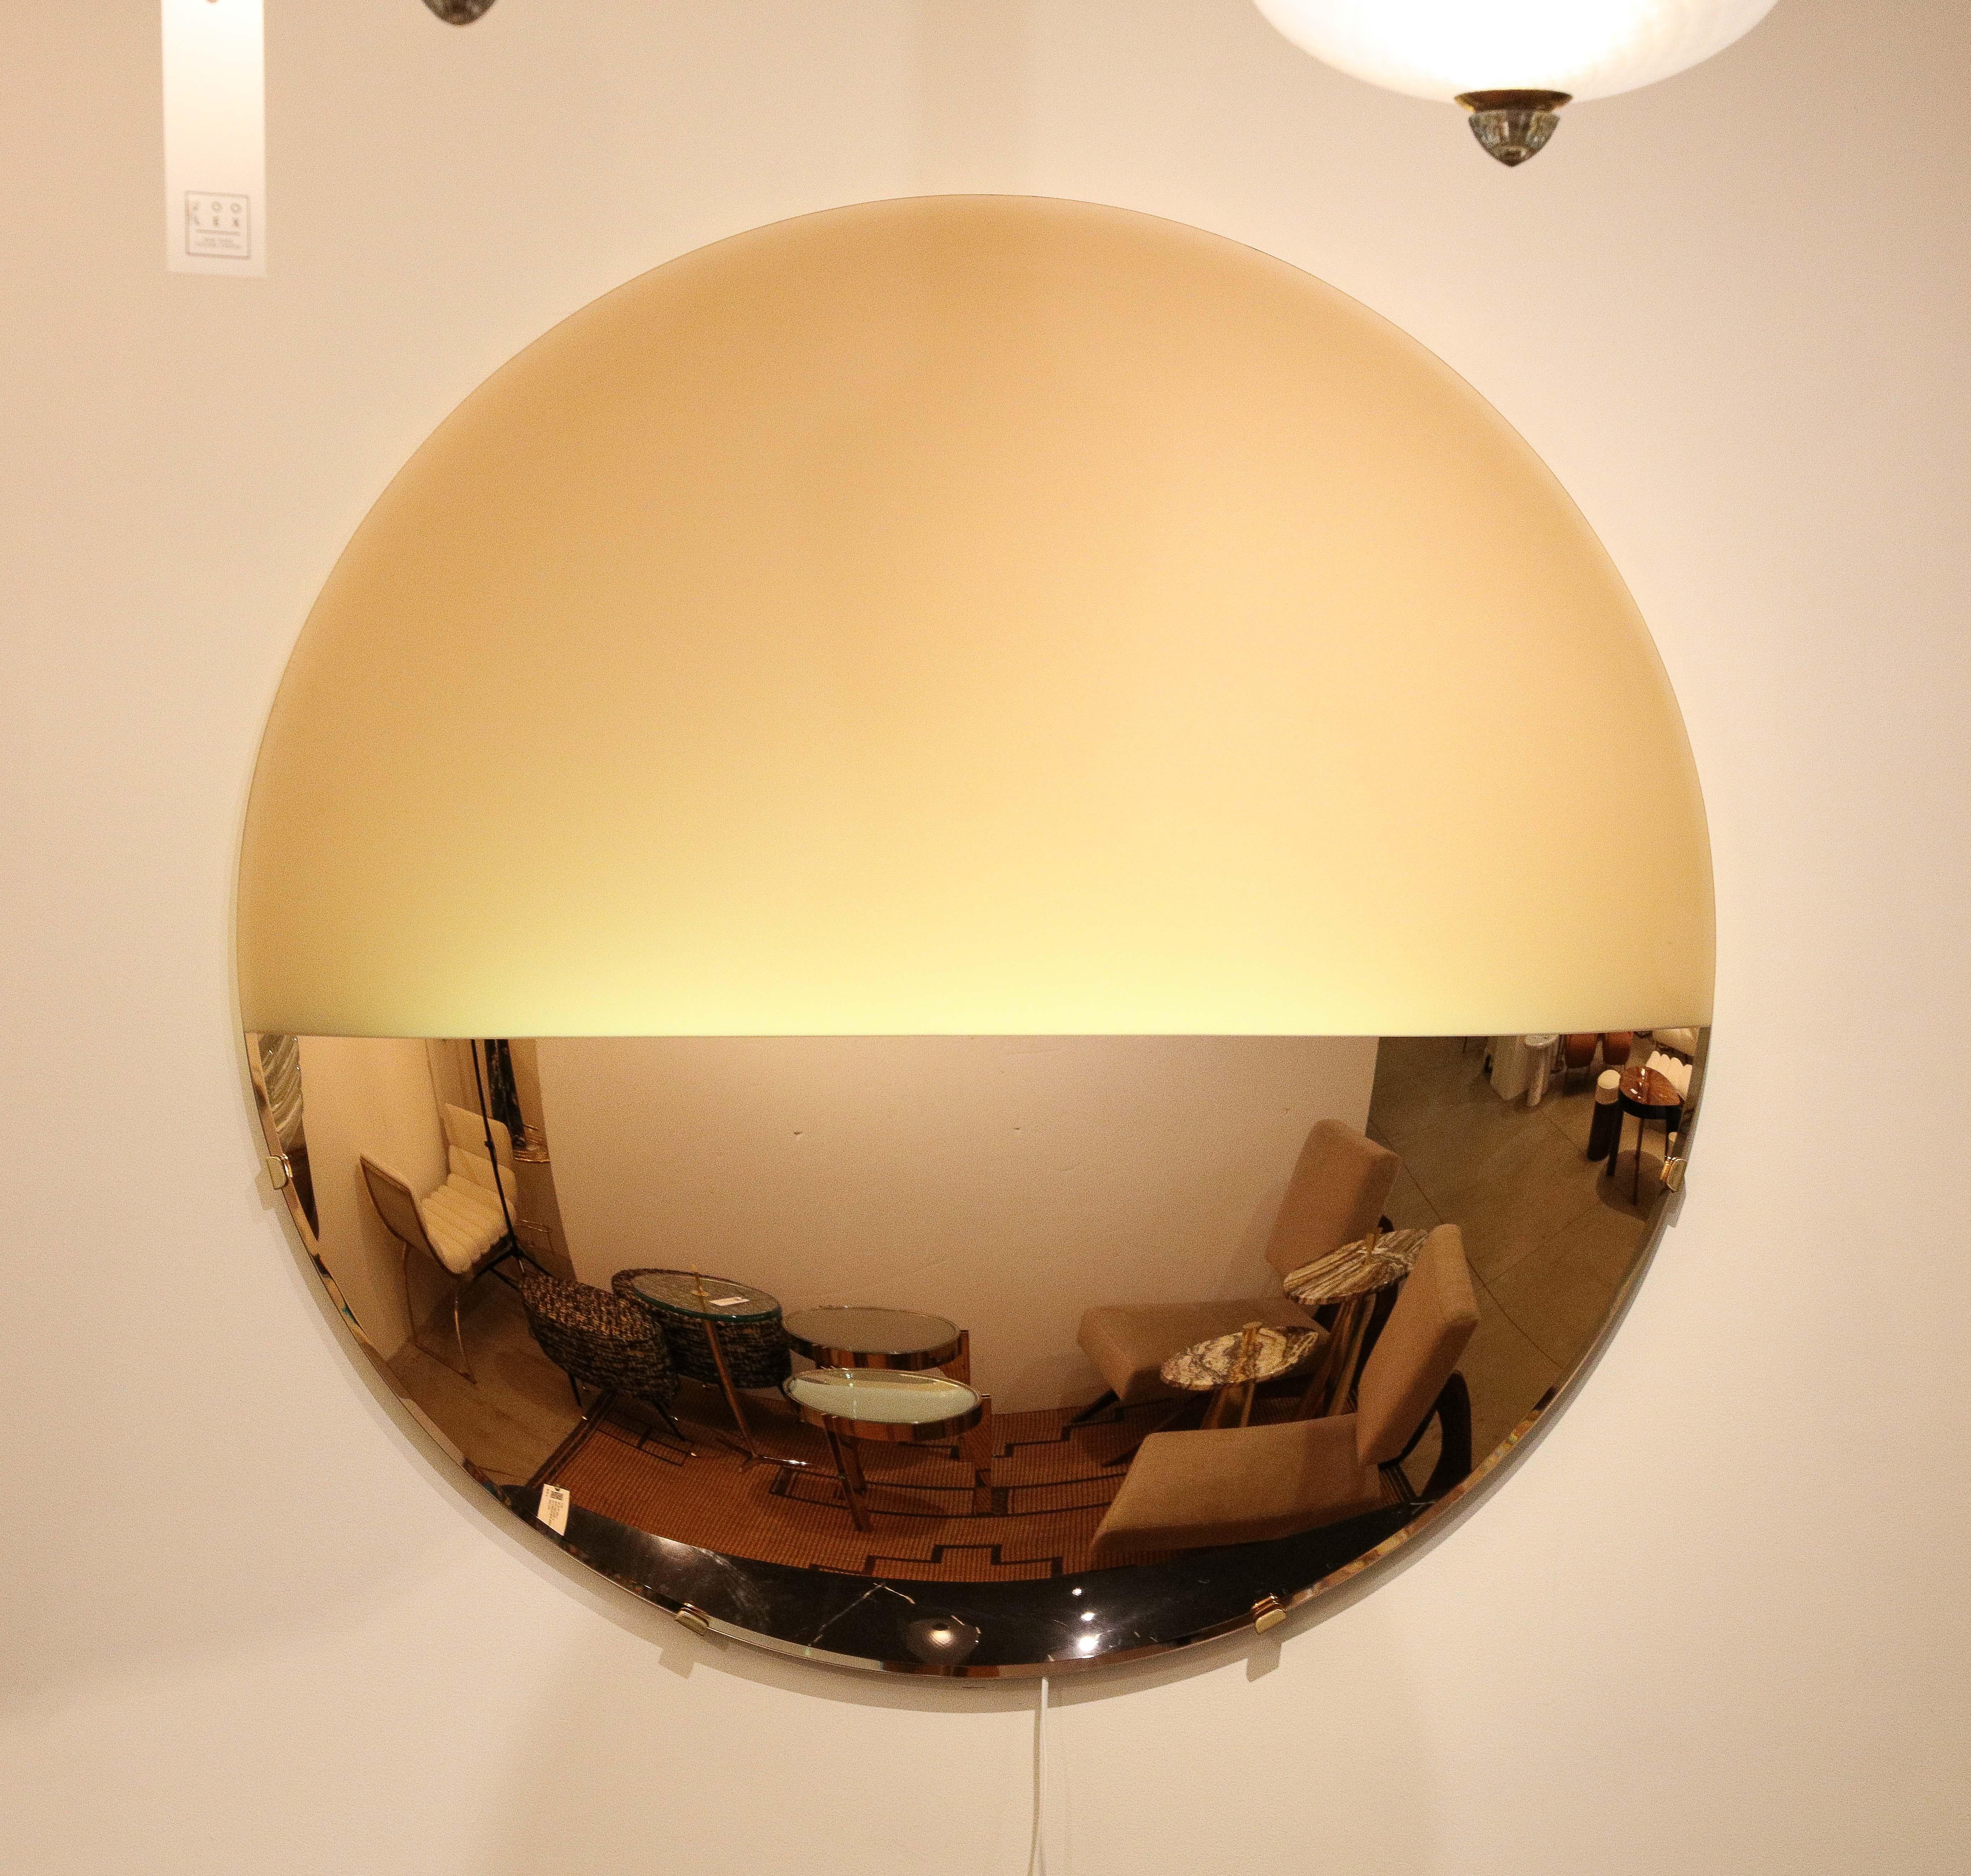 This Large Sculptural Round Convex Rose Gold Lighted Mirror or Wall Art is a unique work of art.  A large, round glass is first thermoformed into a sculptural convex form (i.e. the round surface curves outward like the exterior of a circle or